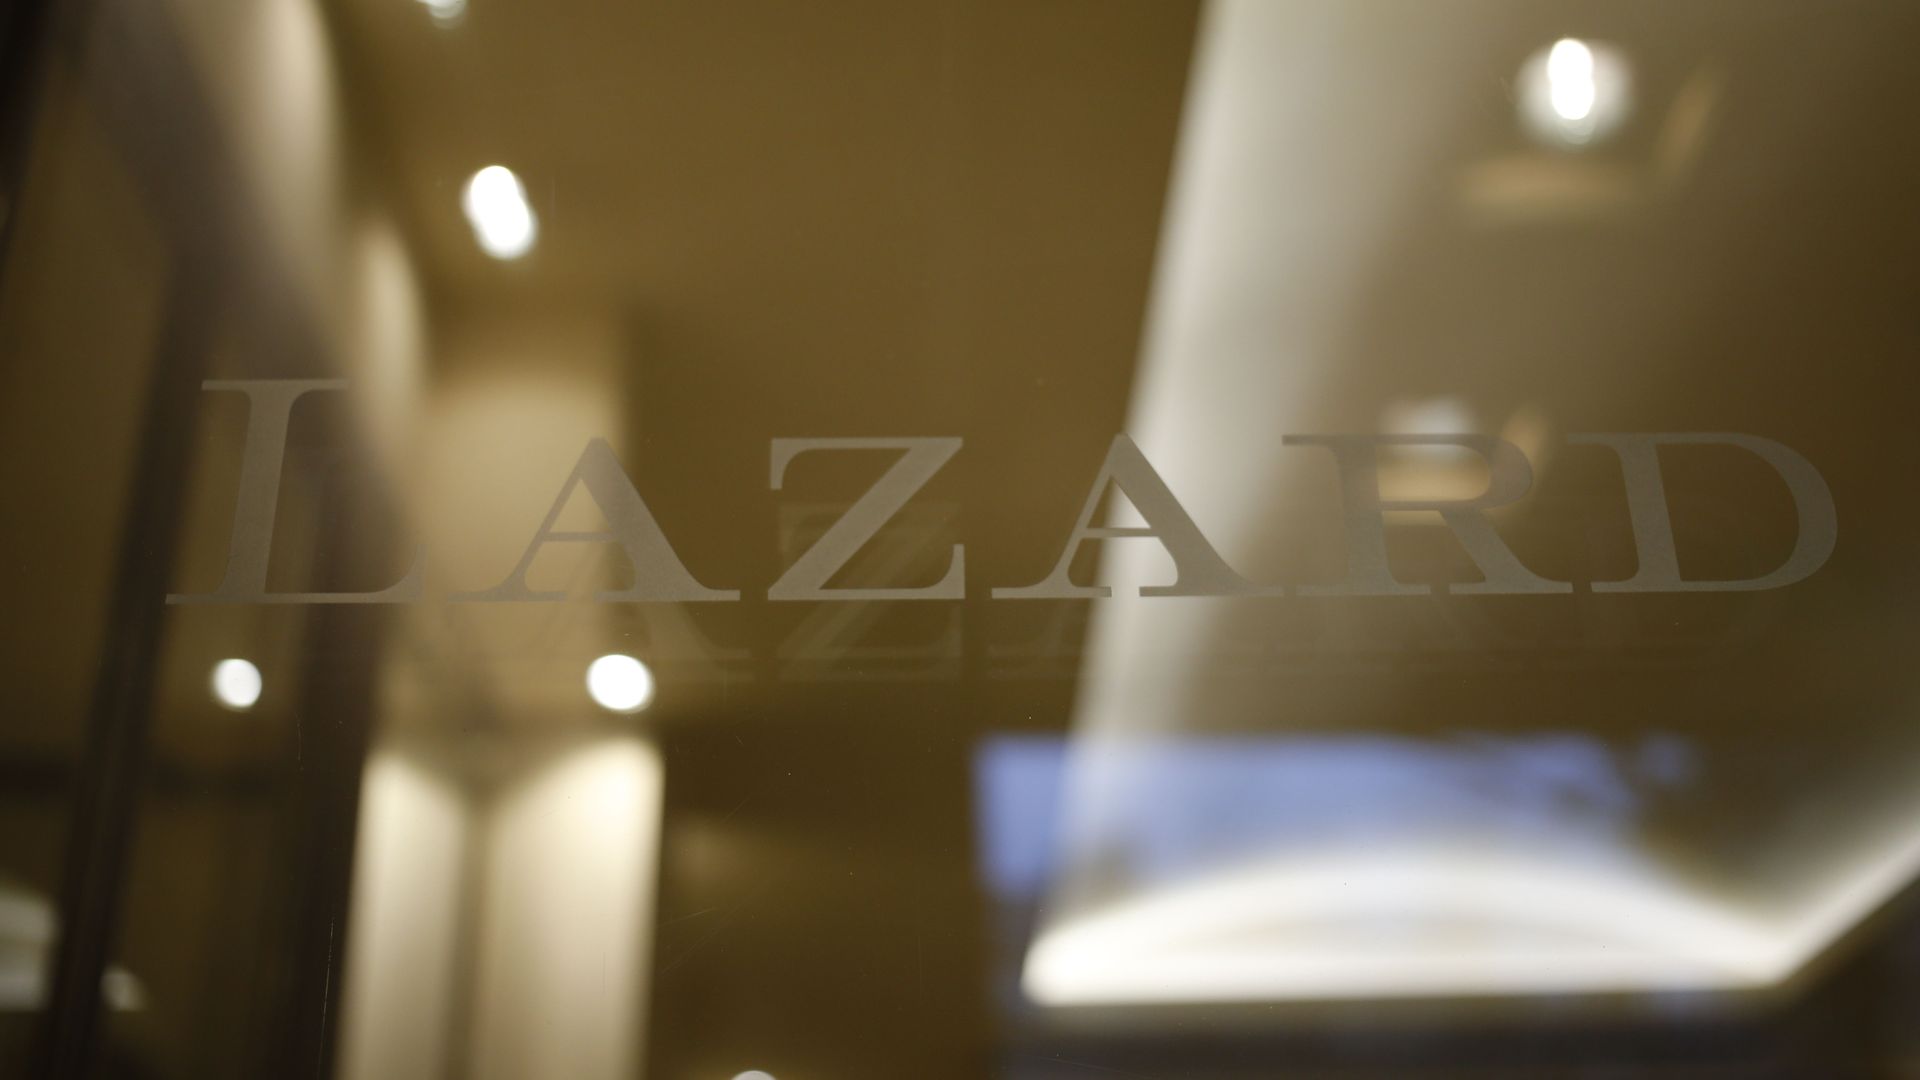 The logo of Lazard on a glass door.